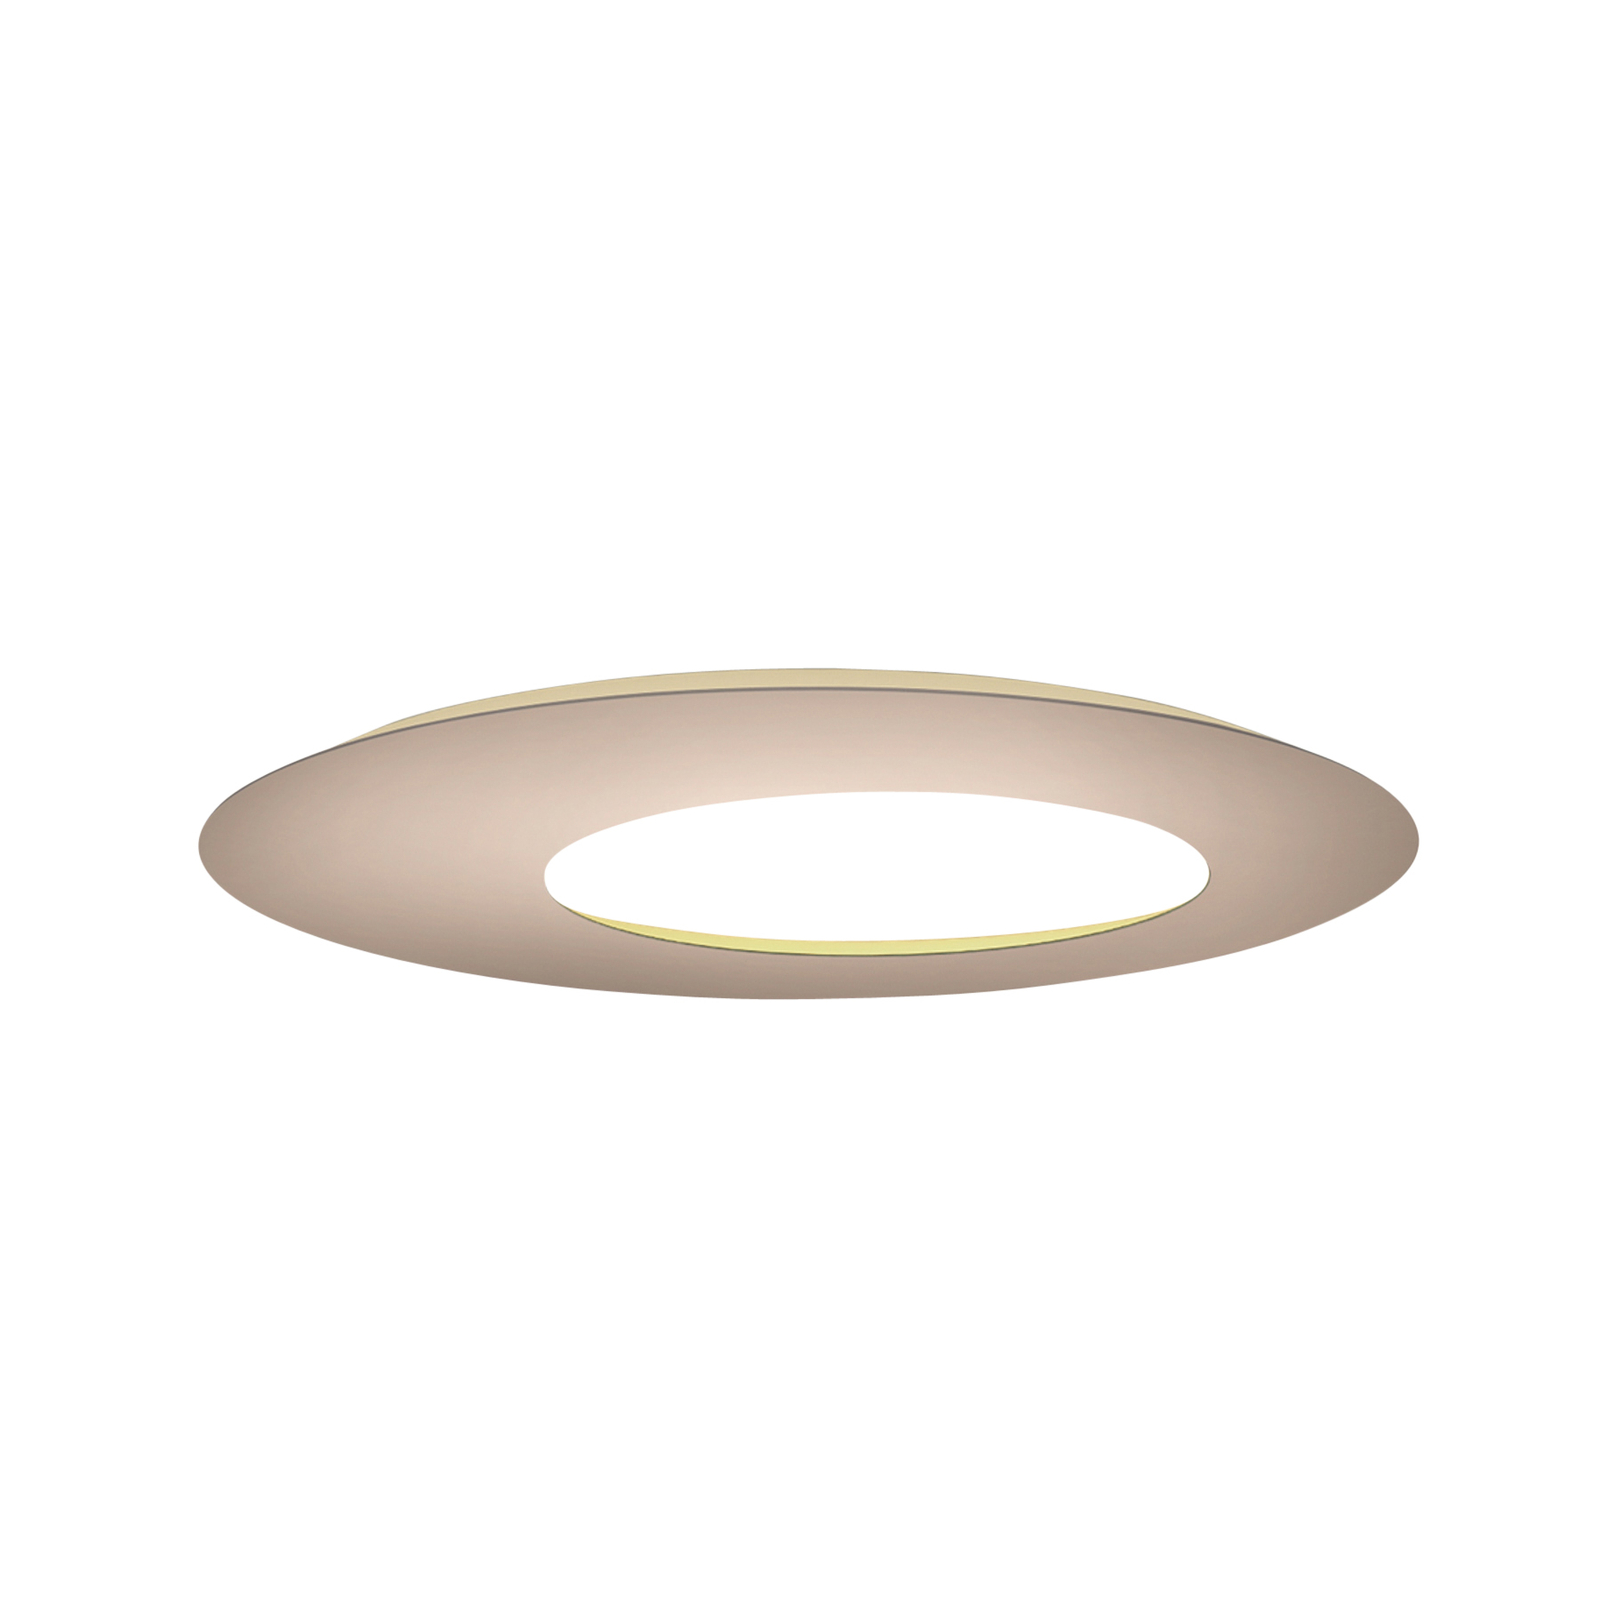 Escale Blade Open LED-vägglampa taupe Ø 79 cm